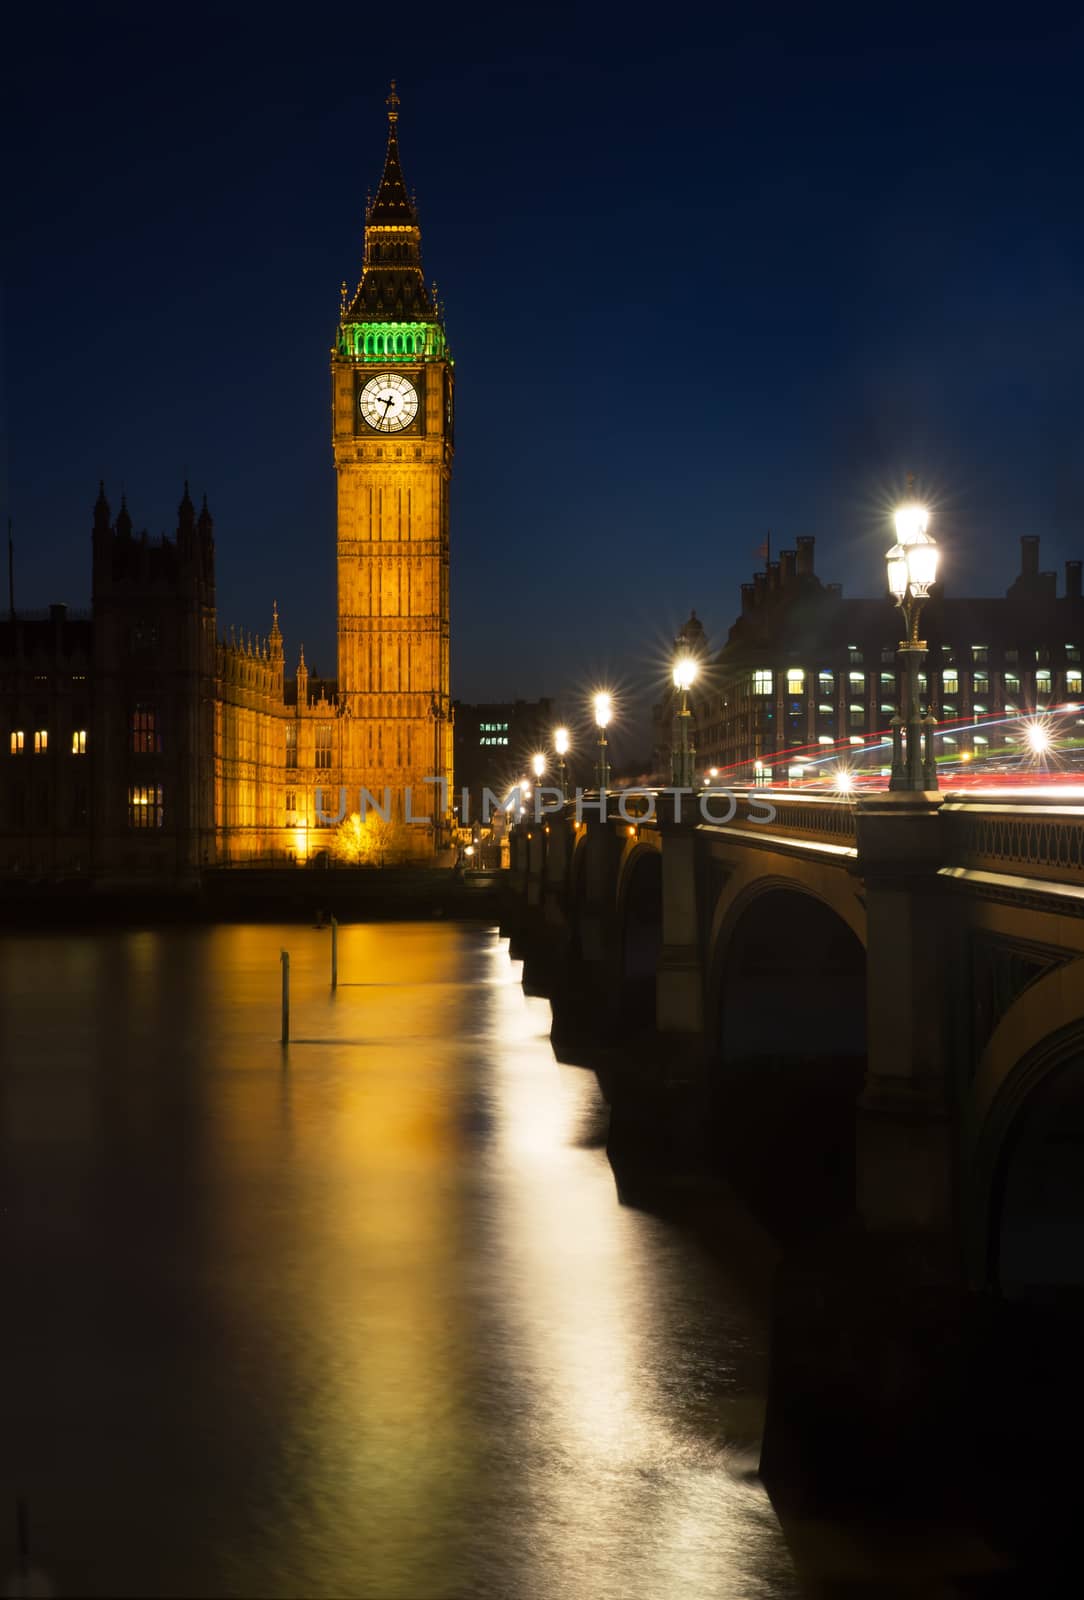 Reflection of the Elizabeth Tower (Big Ben) of the Palace of Westminster in the River Thames